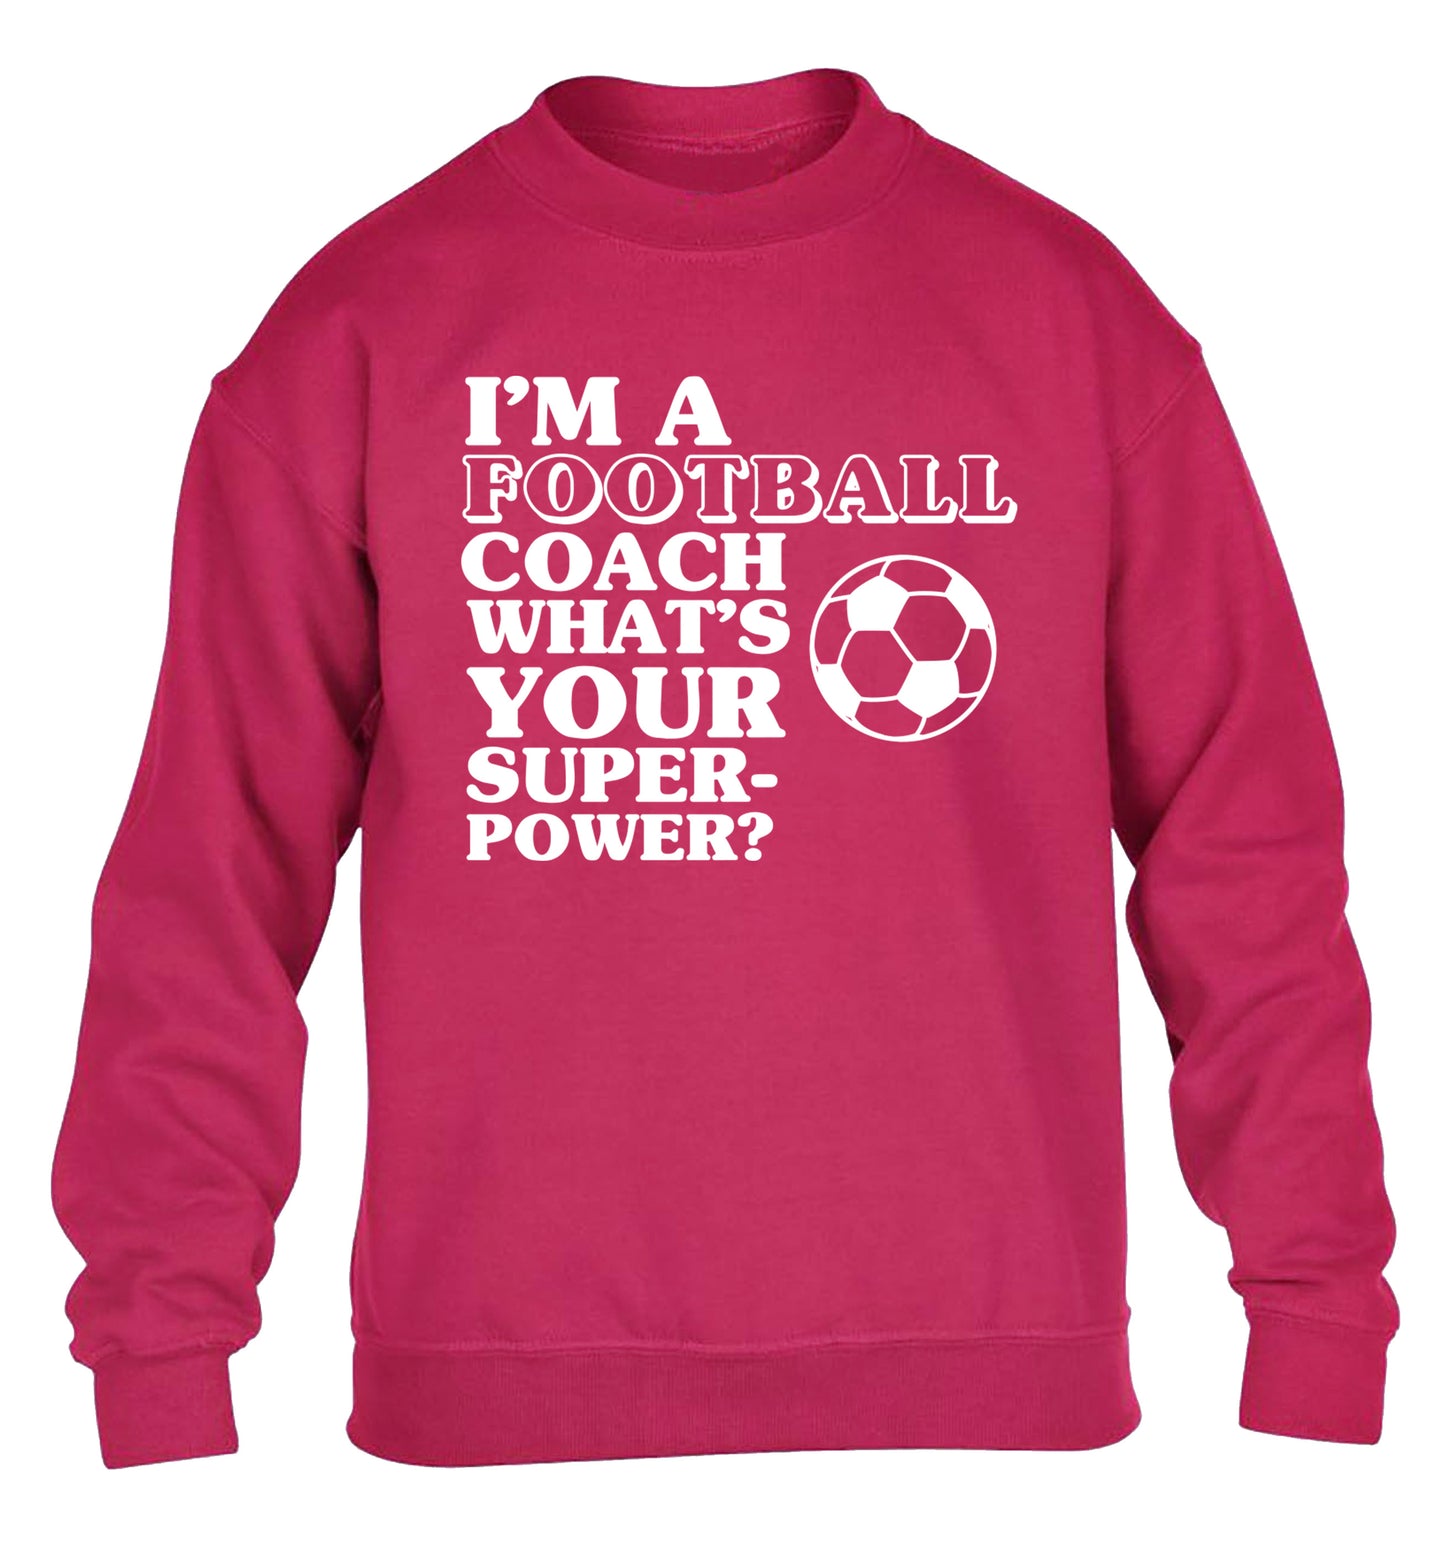 I'm a football coach what's your superpower? children's pink sweater 12-14 Years